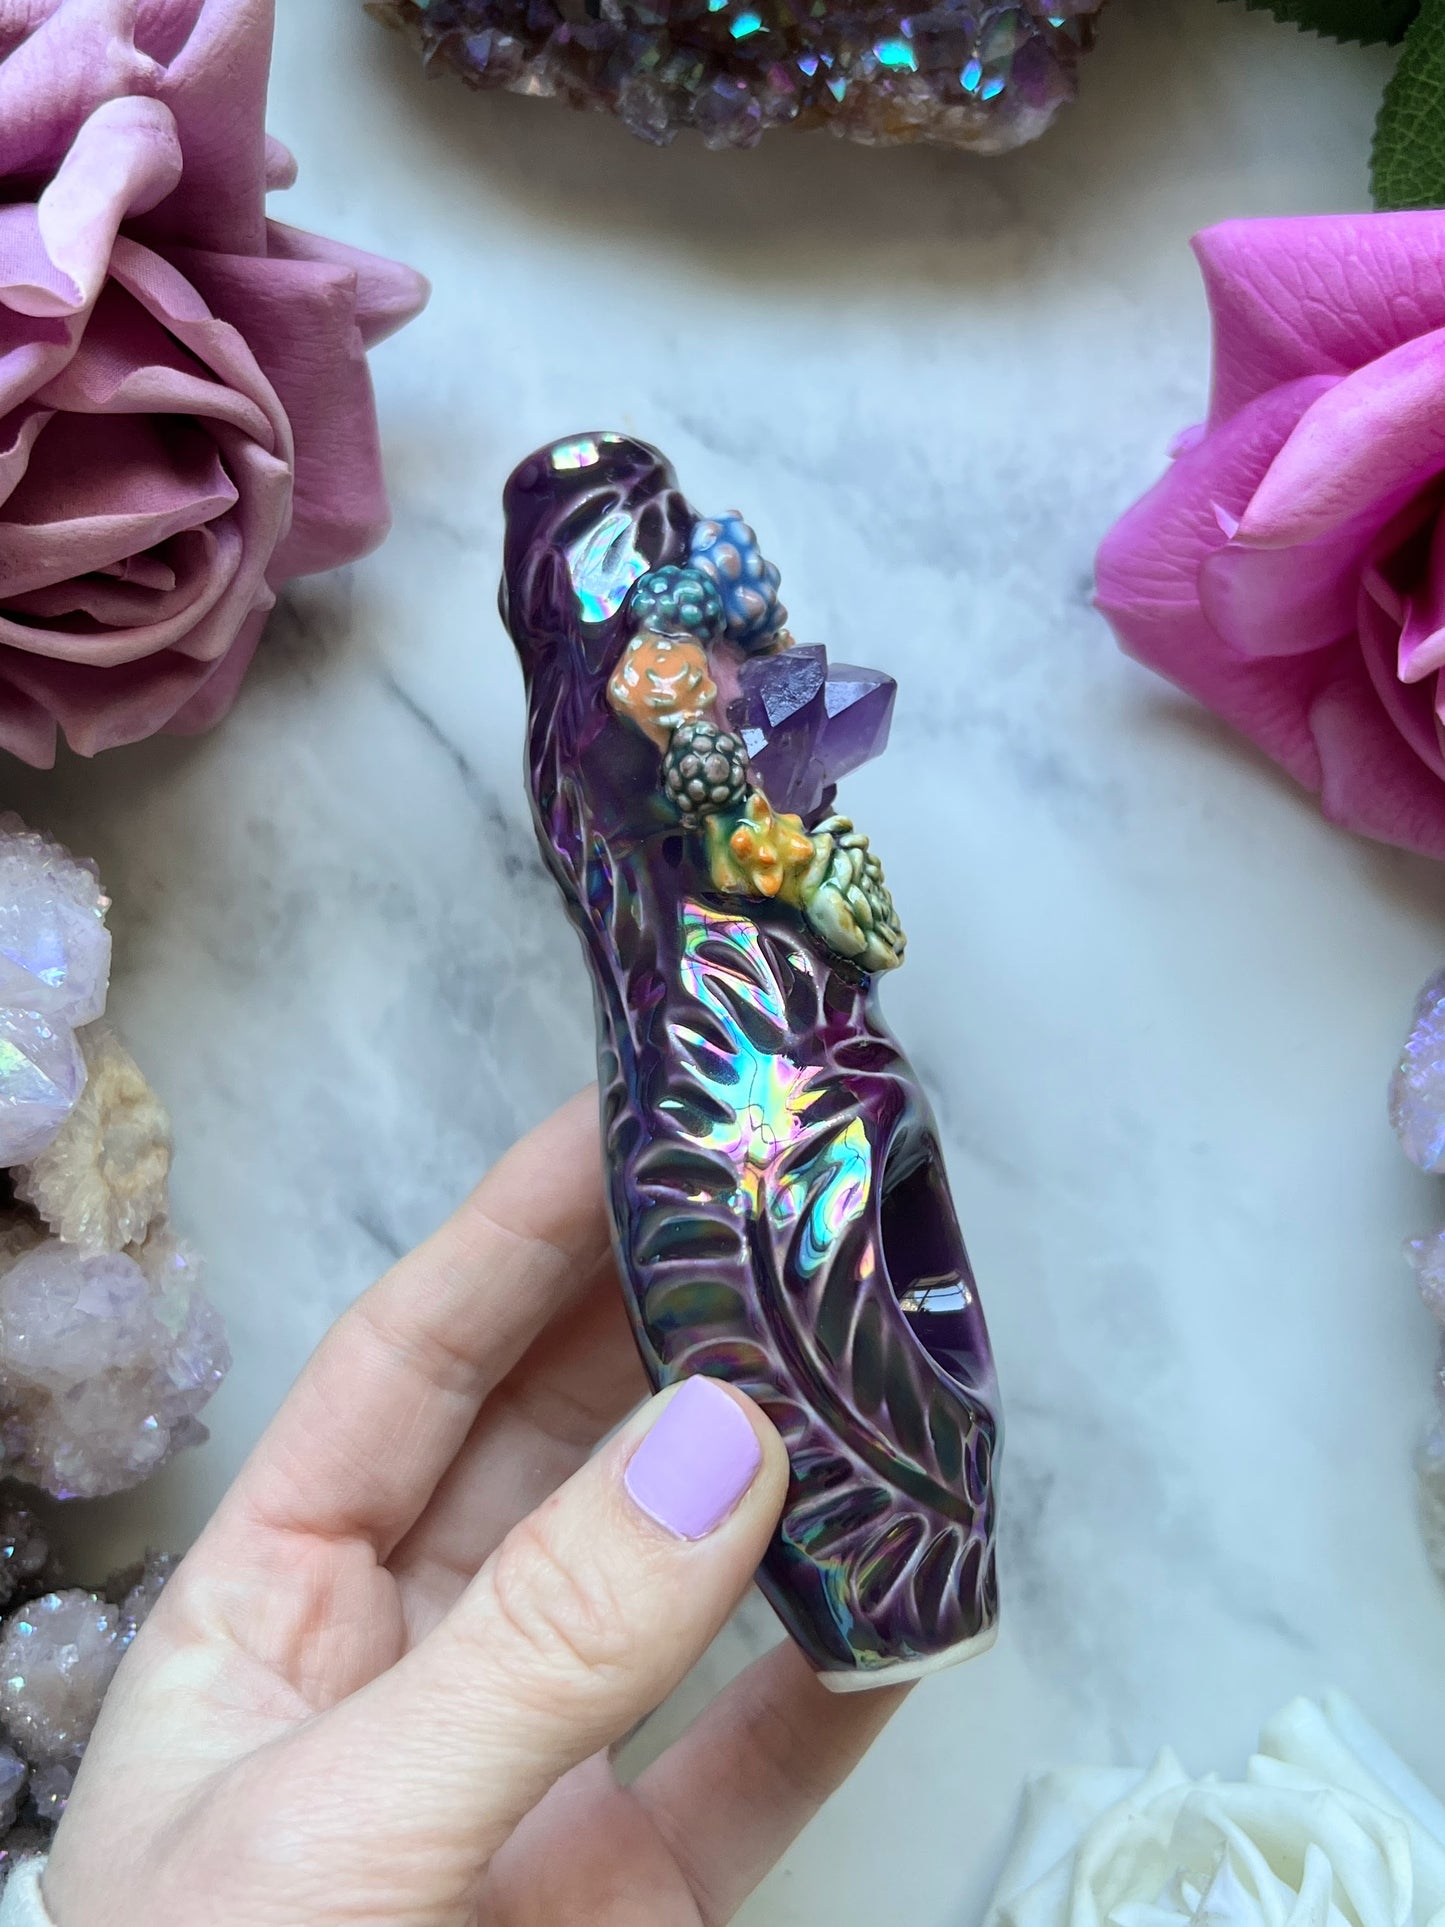 Amethyst Pipe with Succulents, Rainbow Mulberry Ceramic Porcelain Smoking Pipe